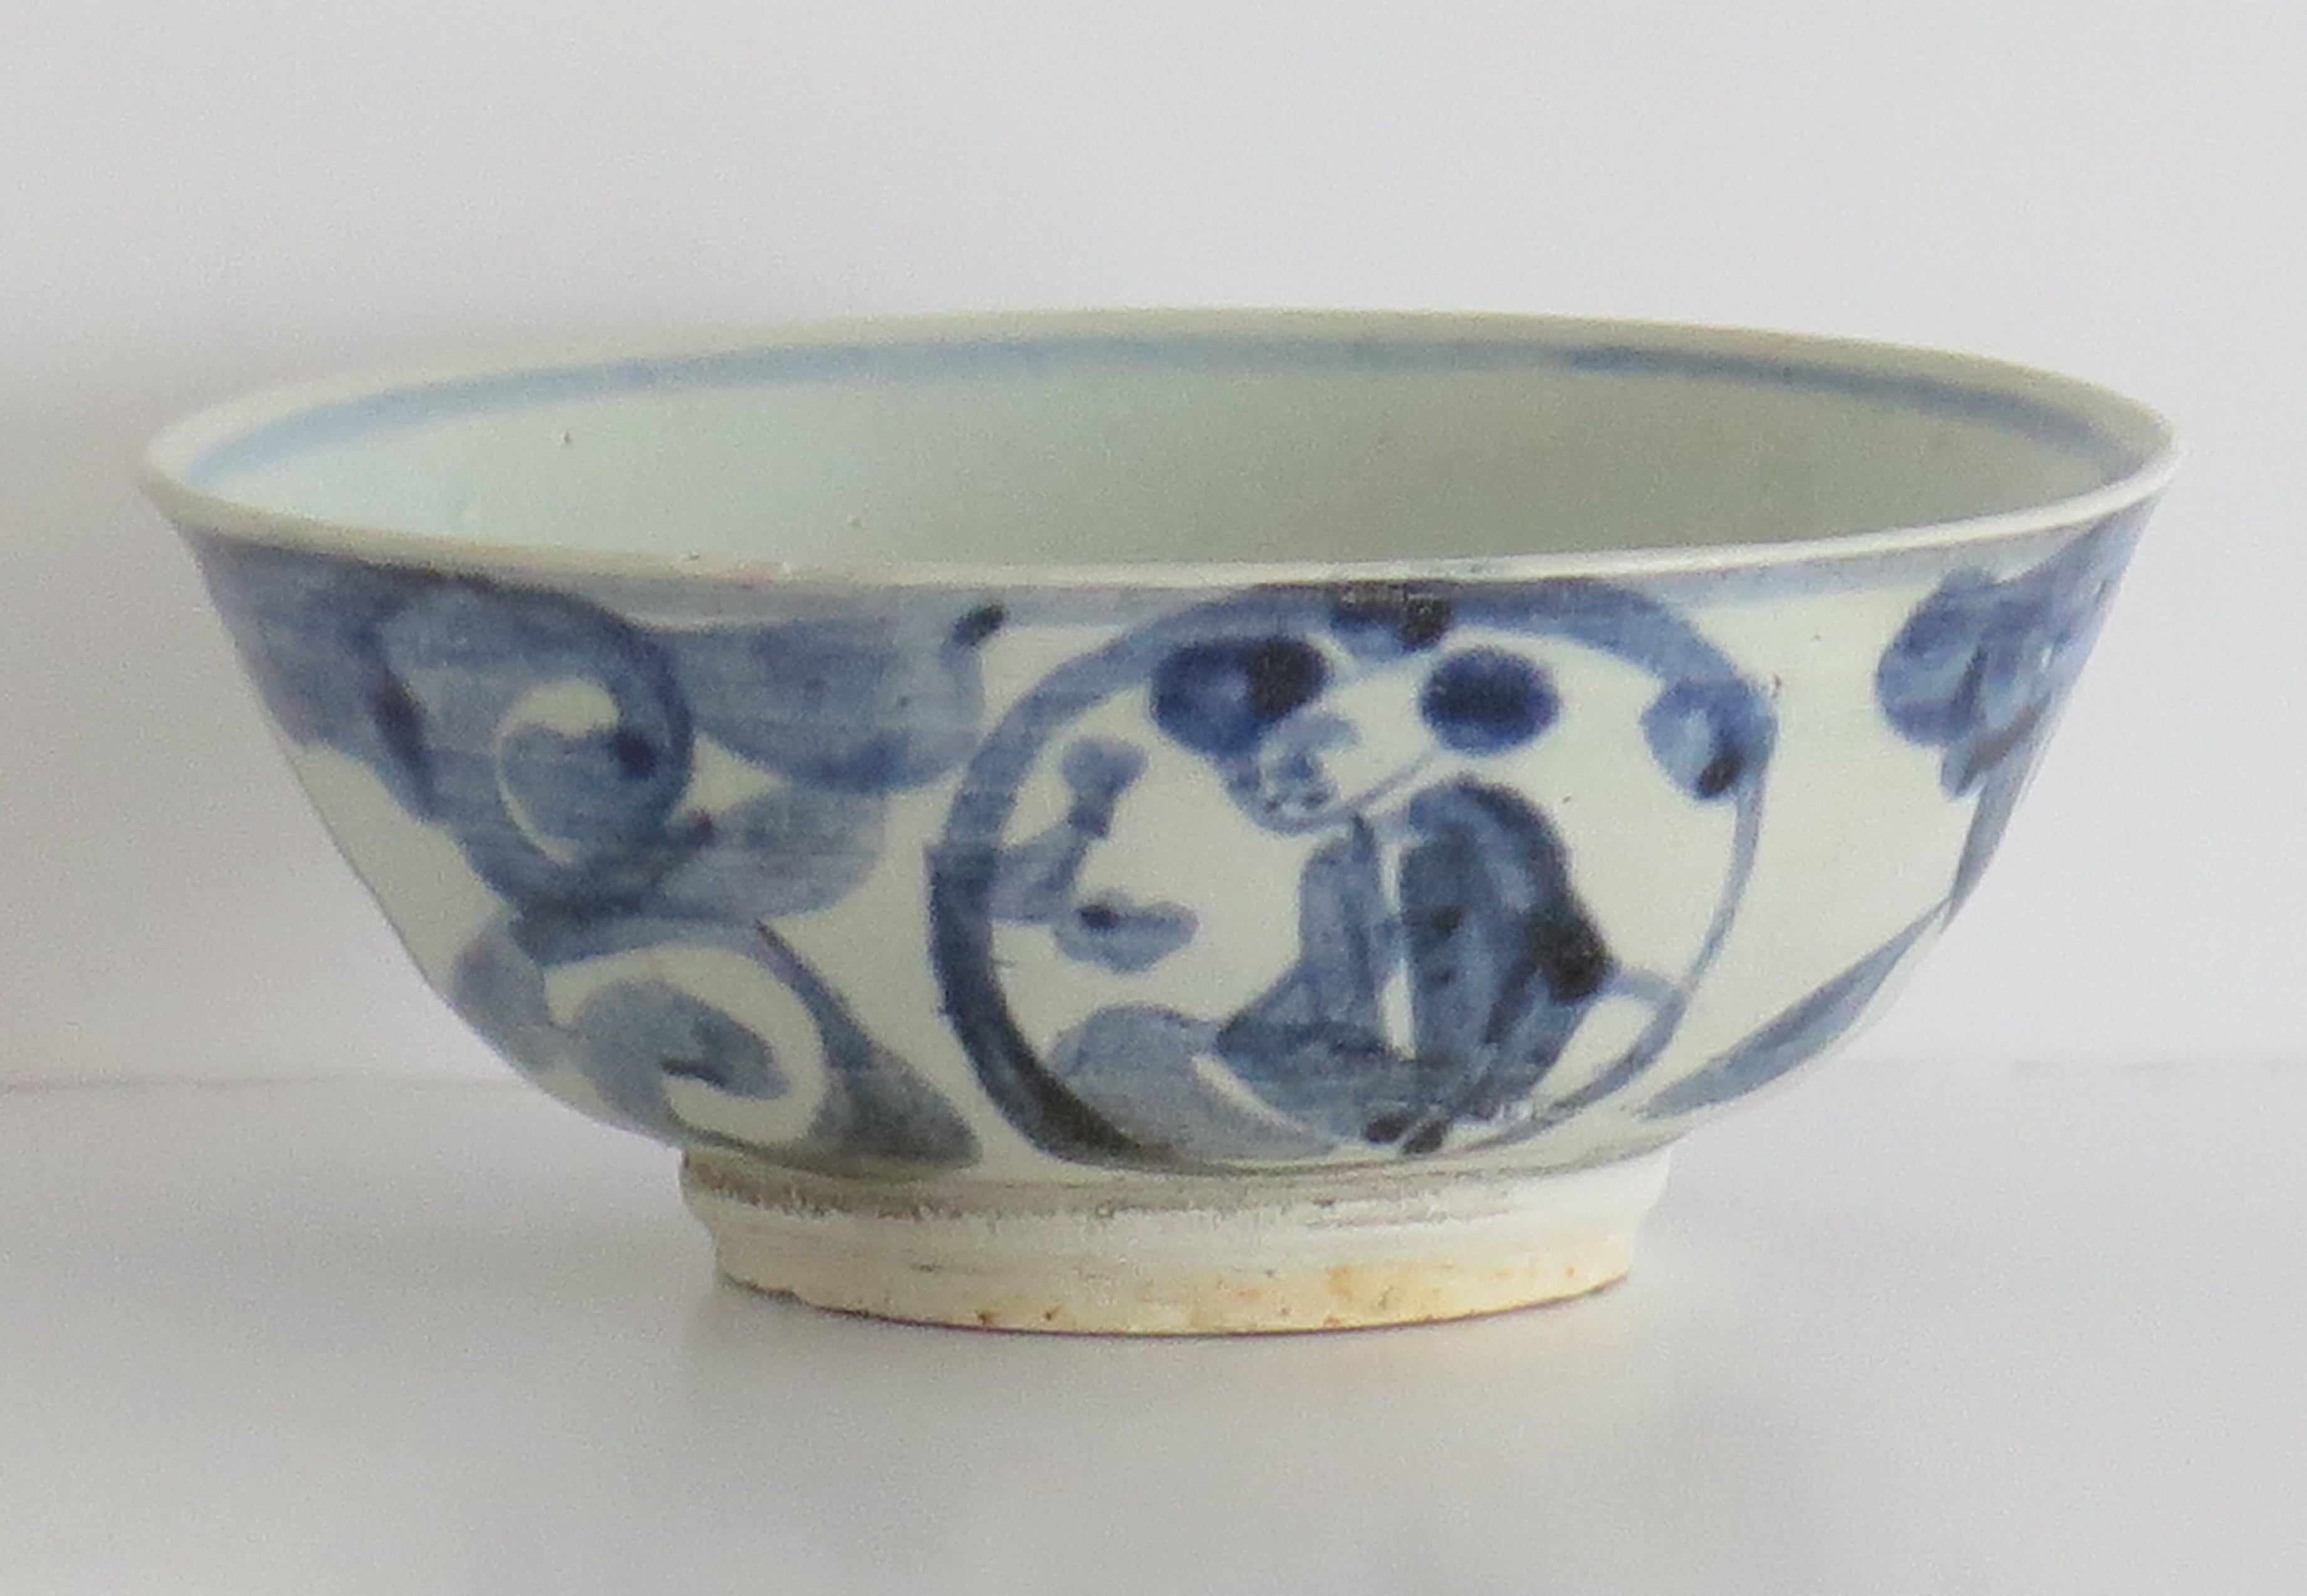 This is a good Chinese porcelain Bowl which we attribute to a piece from the Hatcher Junk Shipwreck Cargo, of the late Ming period, circa 1750

(The Hatcher Cargo was salvaged from the wreck of a Chinese junk in the South China seas port of